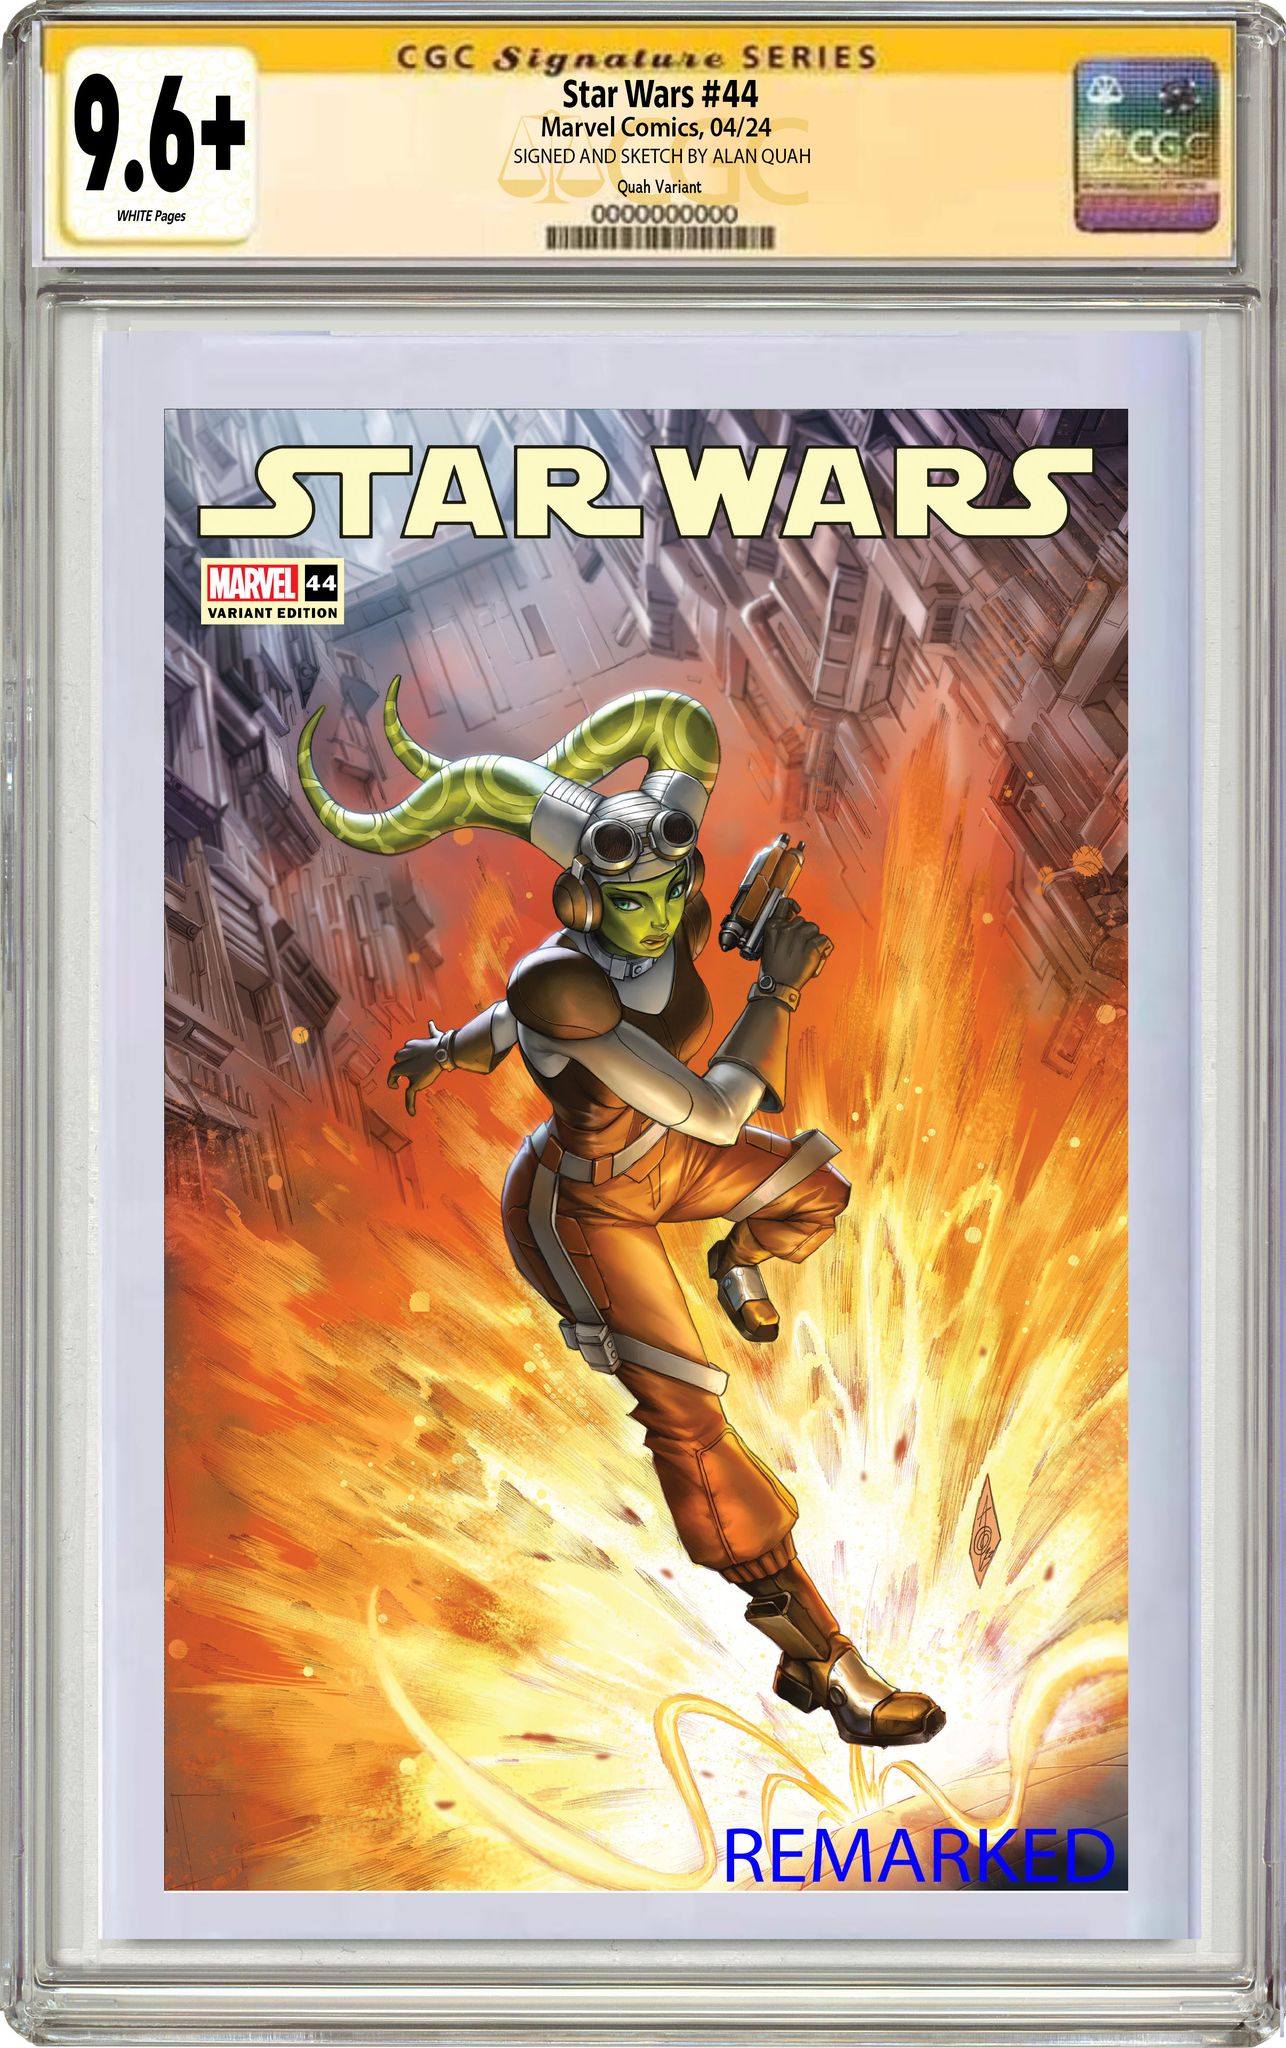 STAR WARS 44 ALAN QUAH REBELS 10TH ANNIVERSARY LIMITED EDITION #3 OF 4 EXCLUSIVE SERIES OPTIONS 03/06/24